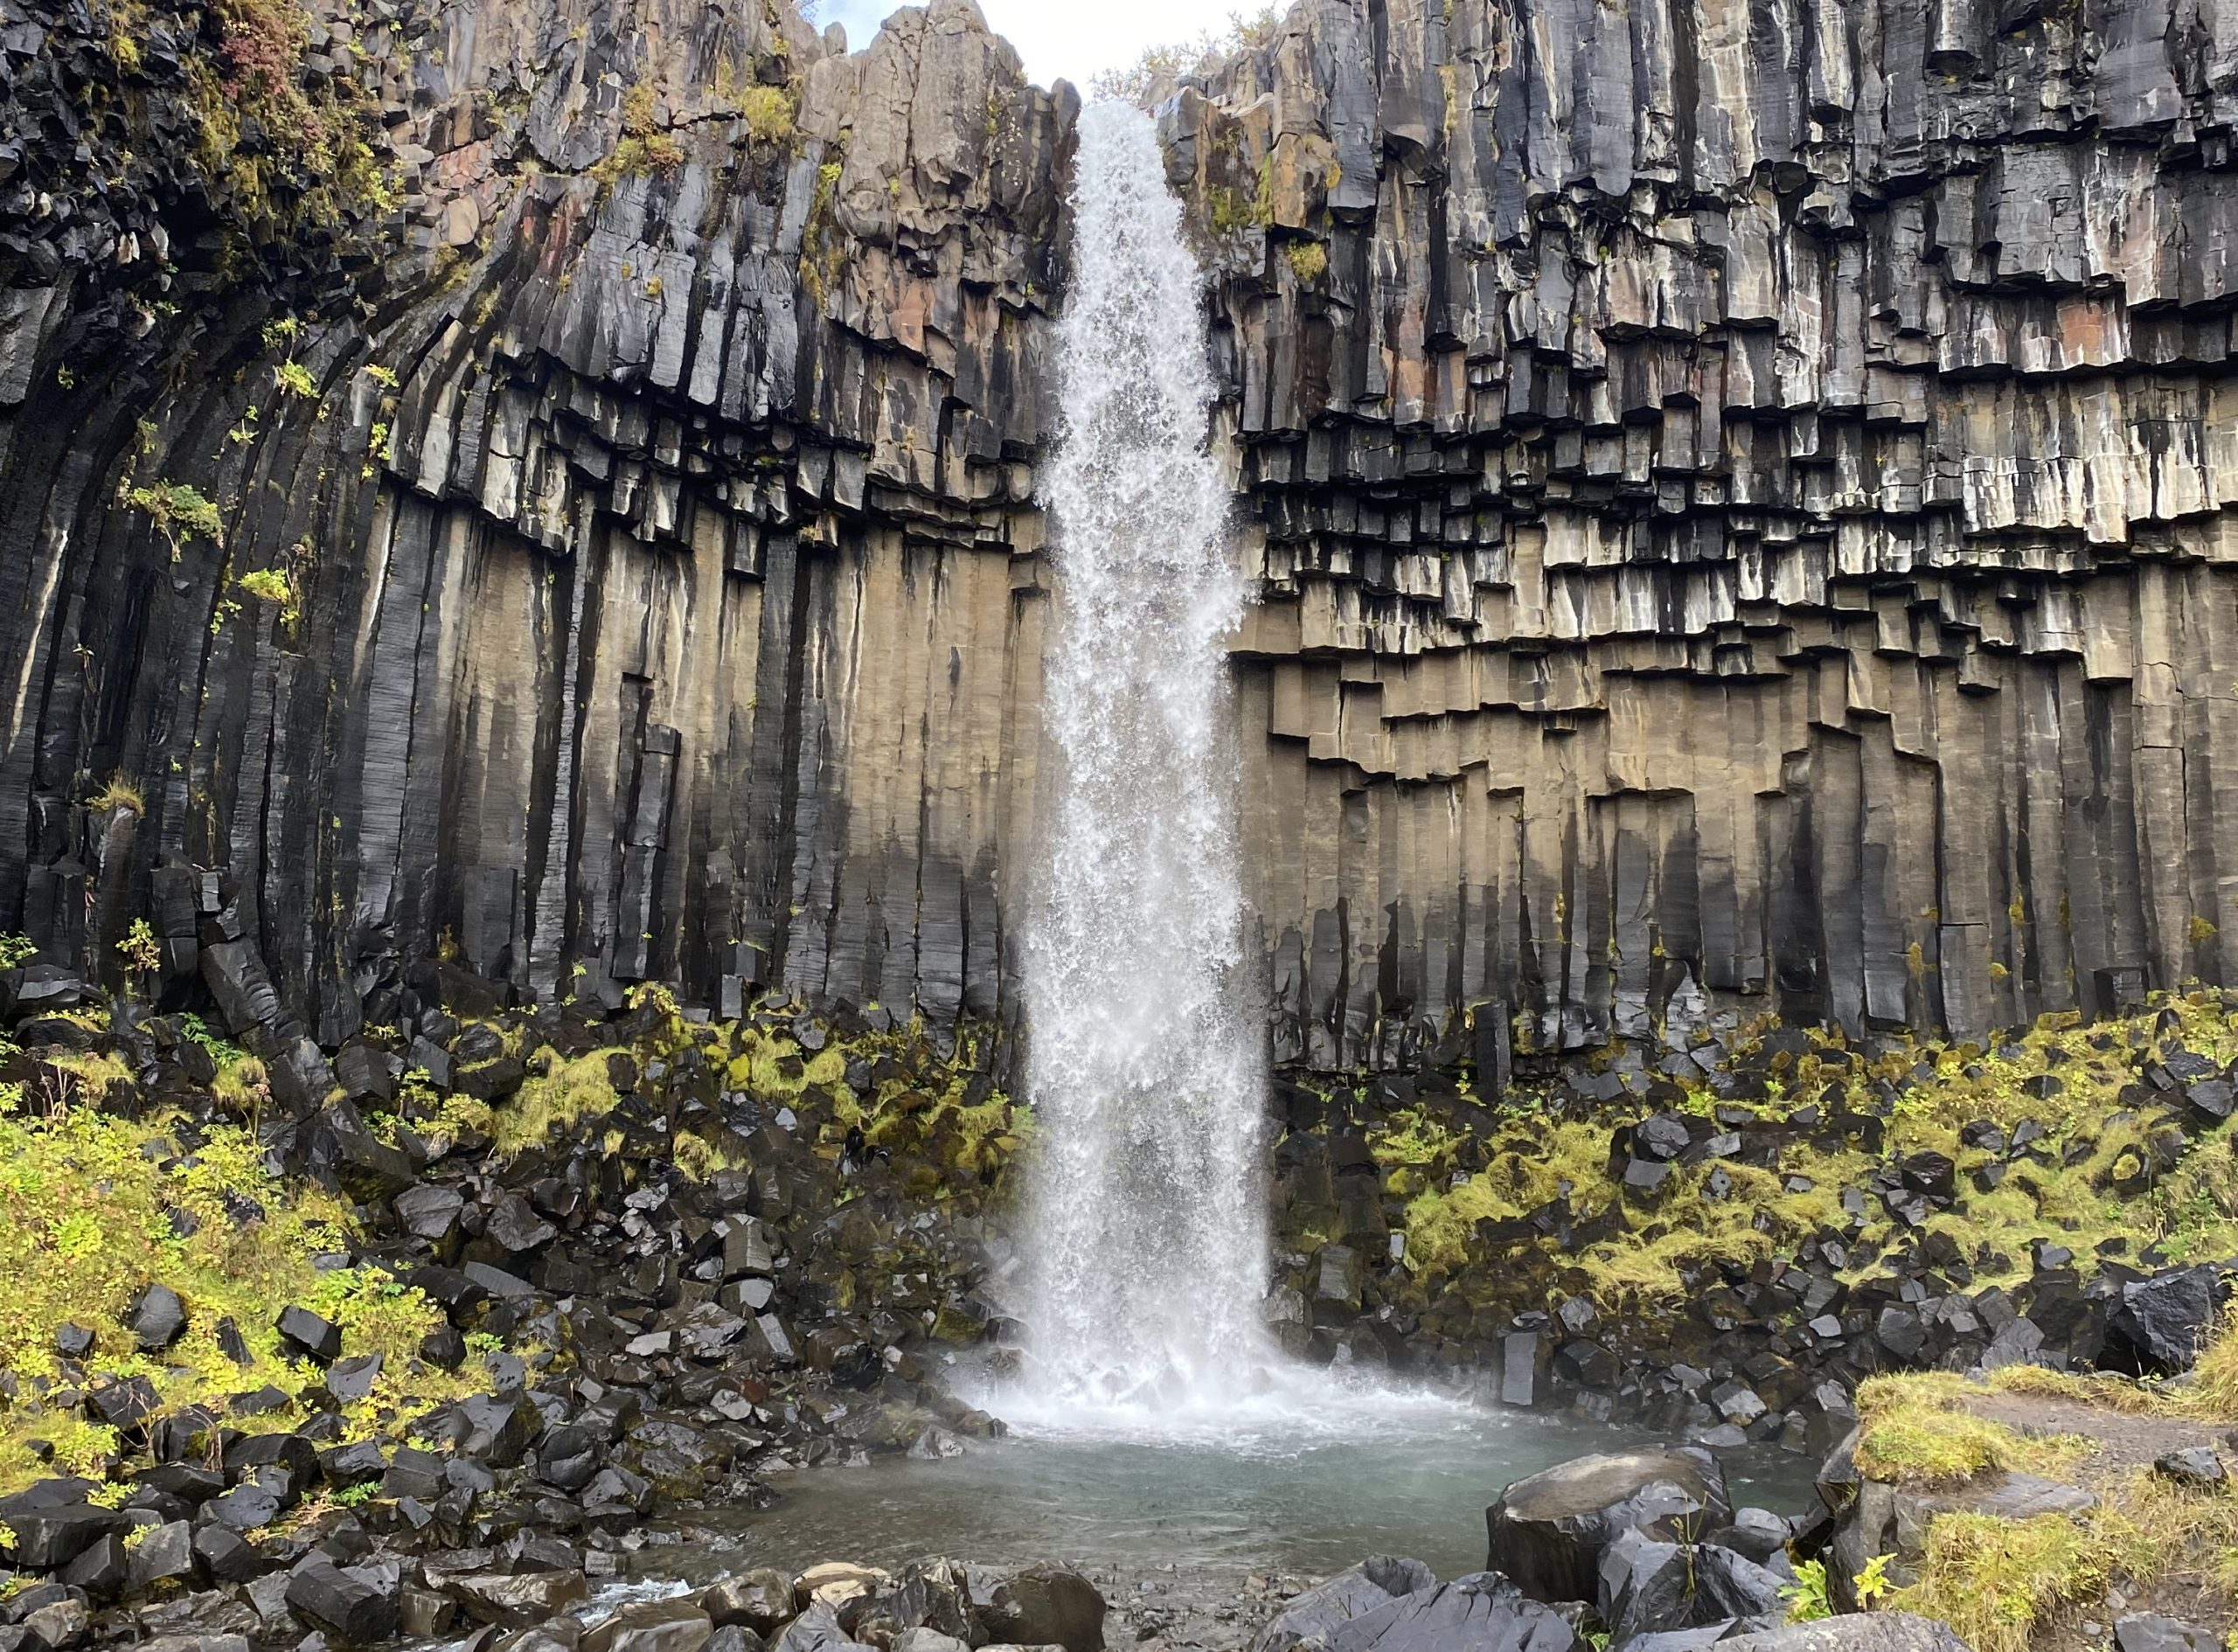 “I just vacationed in Iceland, one of the most beautiful countries in the world. This is just one of many pictures I took on my trip!” Carlos, Founder Recruiting for Good